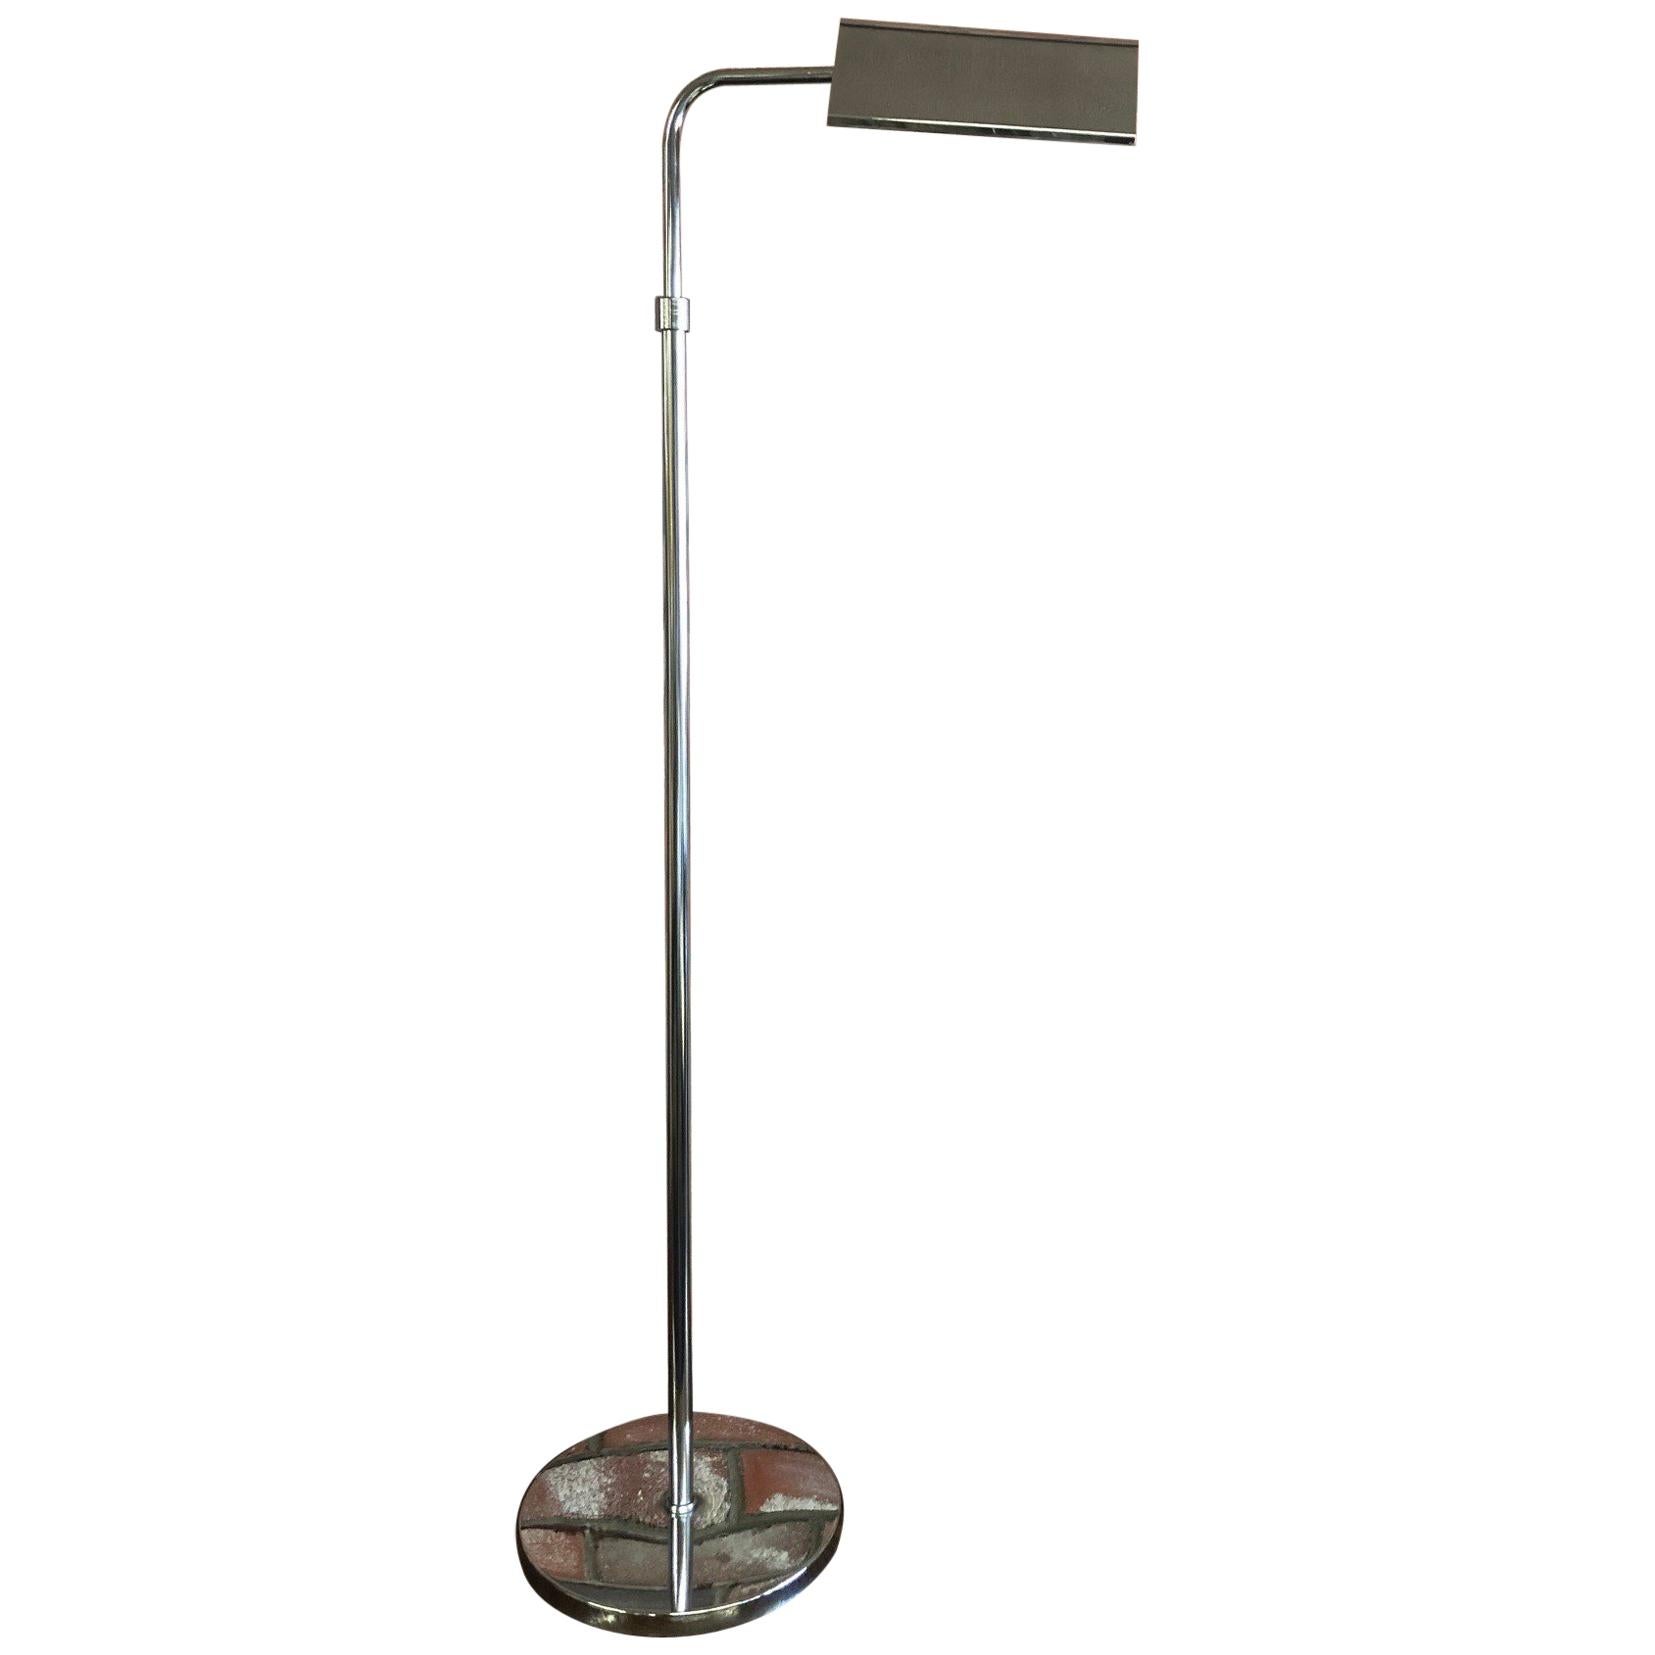 Midcentury Adjustable Chrome Pharmacy Floor Lamp in the Style of Koch & Lowy For Sale